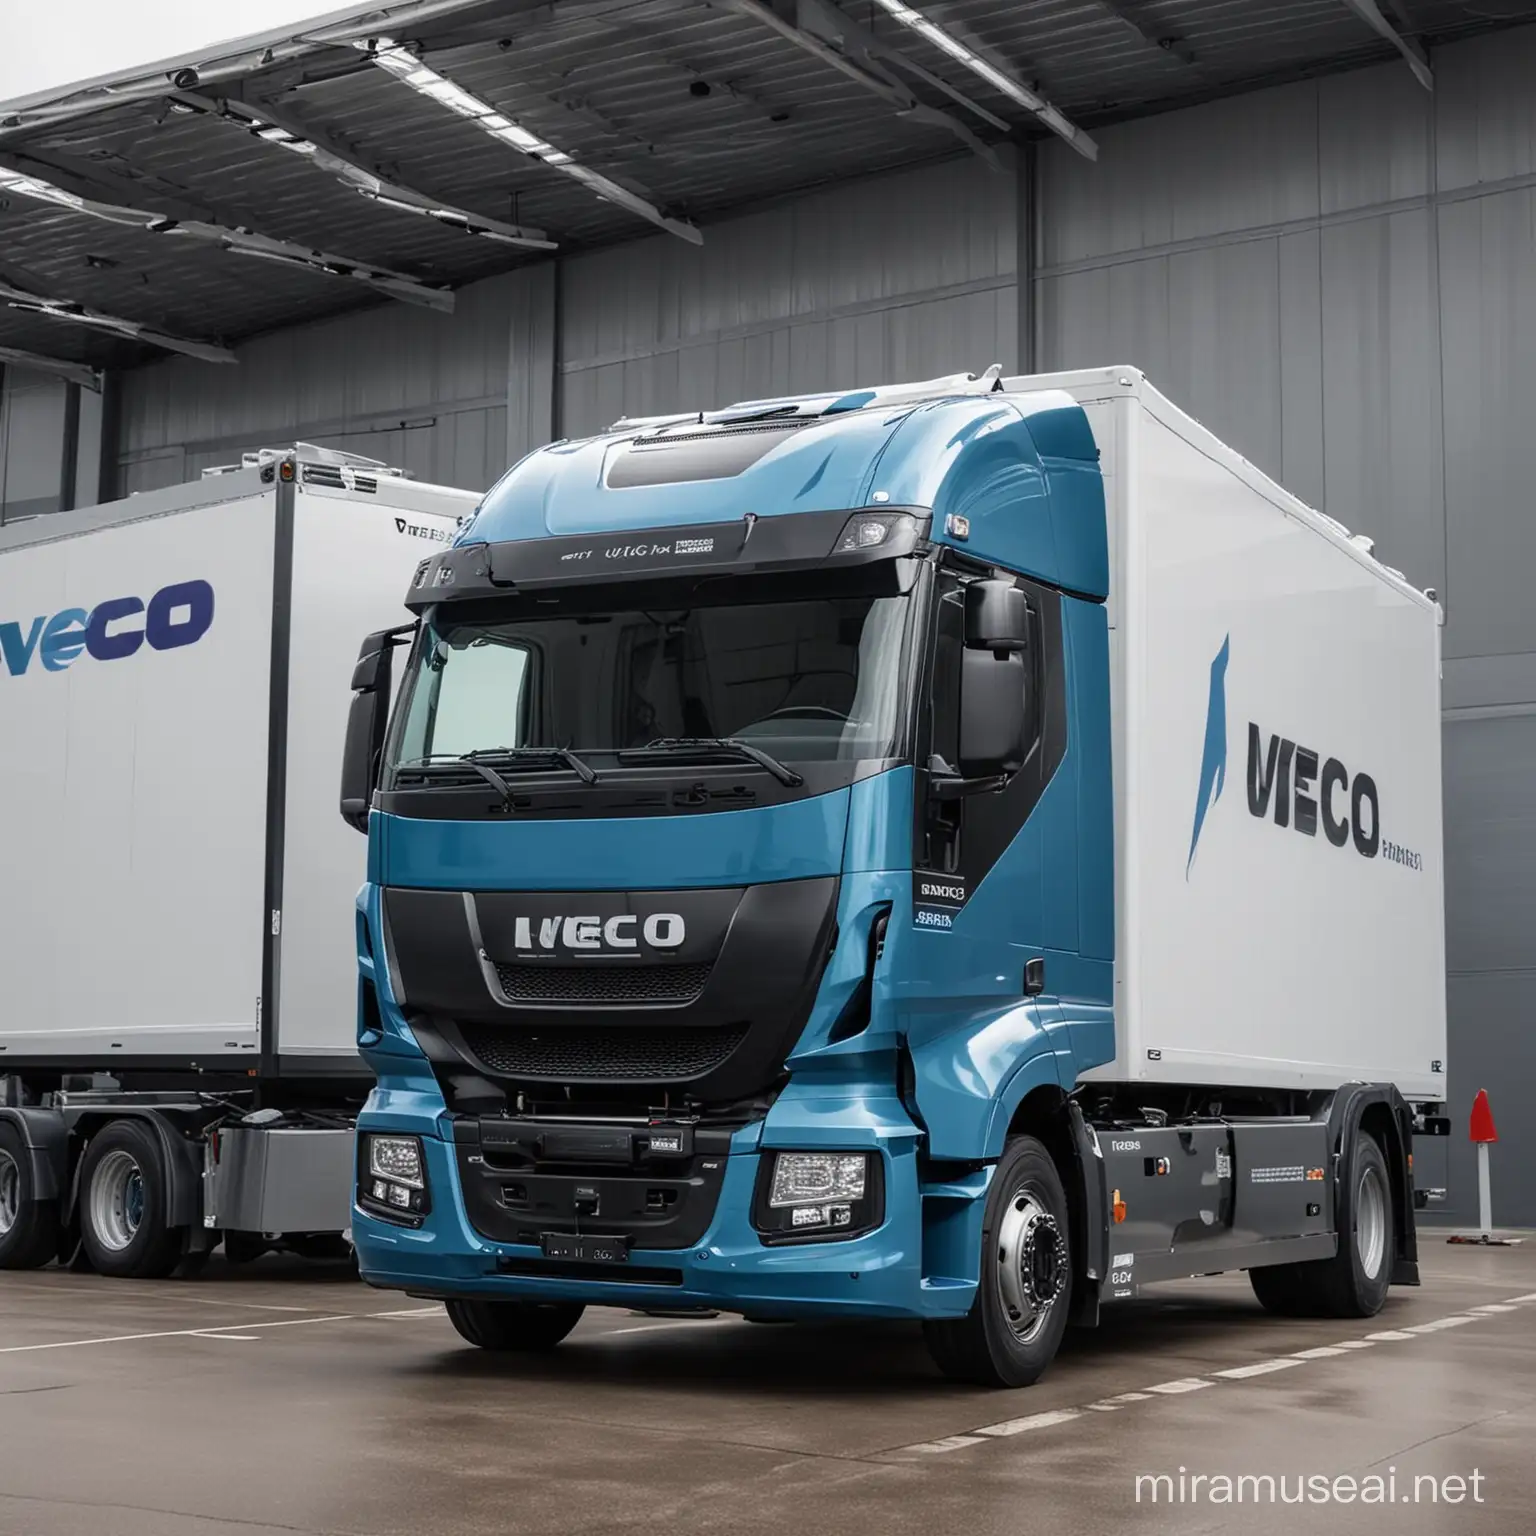 Electric Iveco Truck in Automotive Logistics